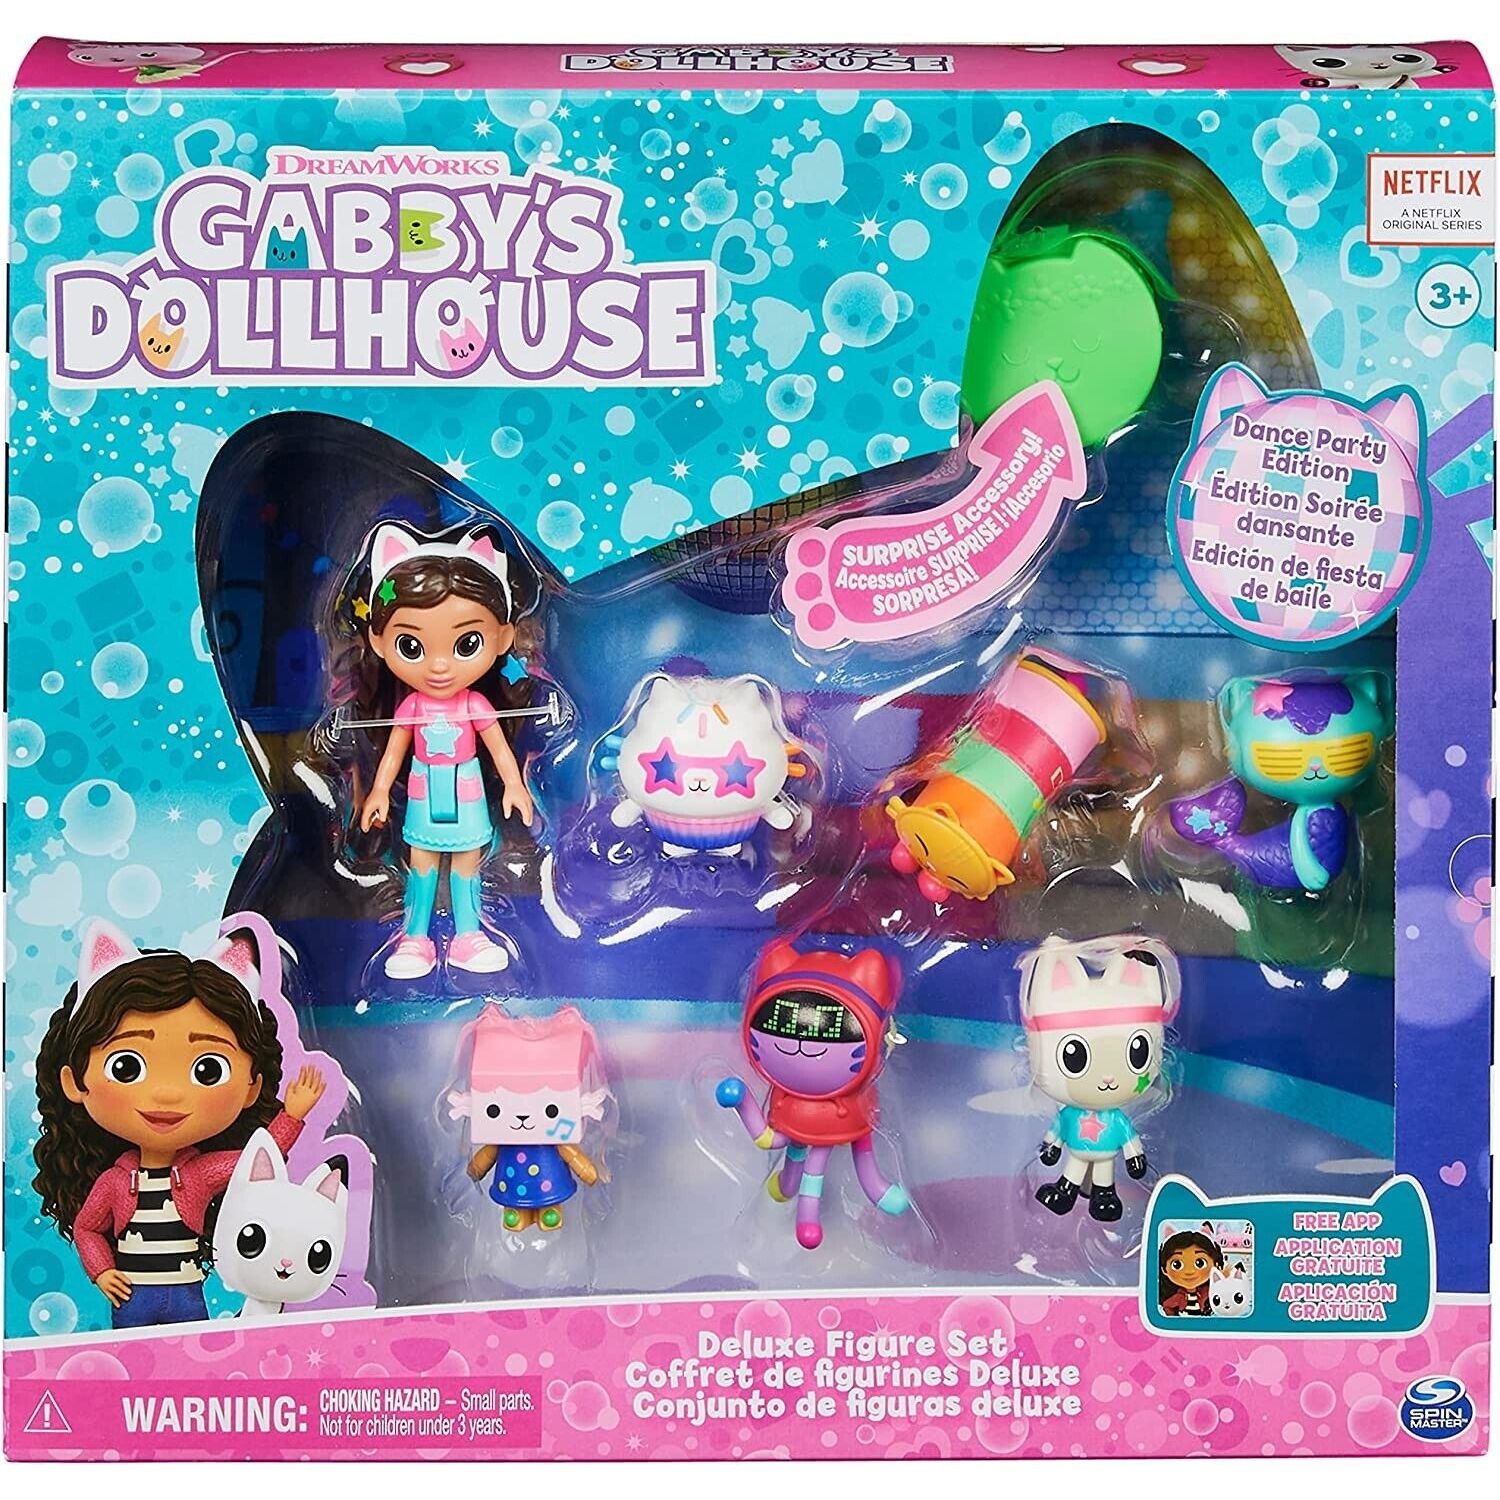 GABBY's Dollhouse Deluxe Figures Dance Party Set